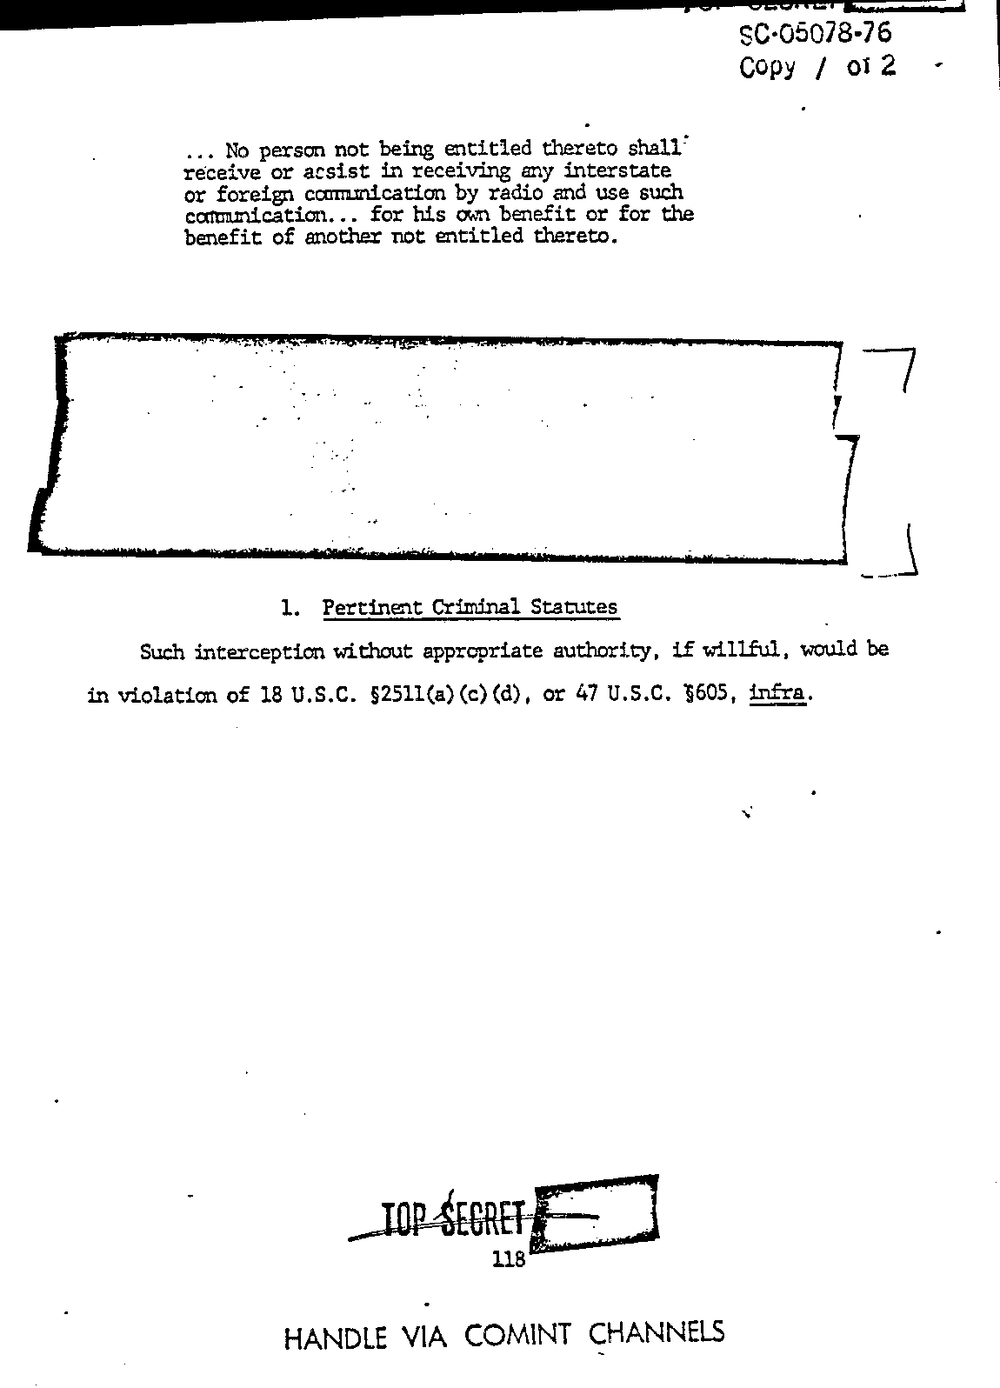 Page 126 from Report on Inquiry Into CIA Related Electronic Surveillance Activities